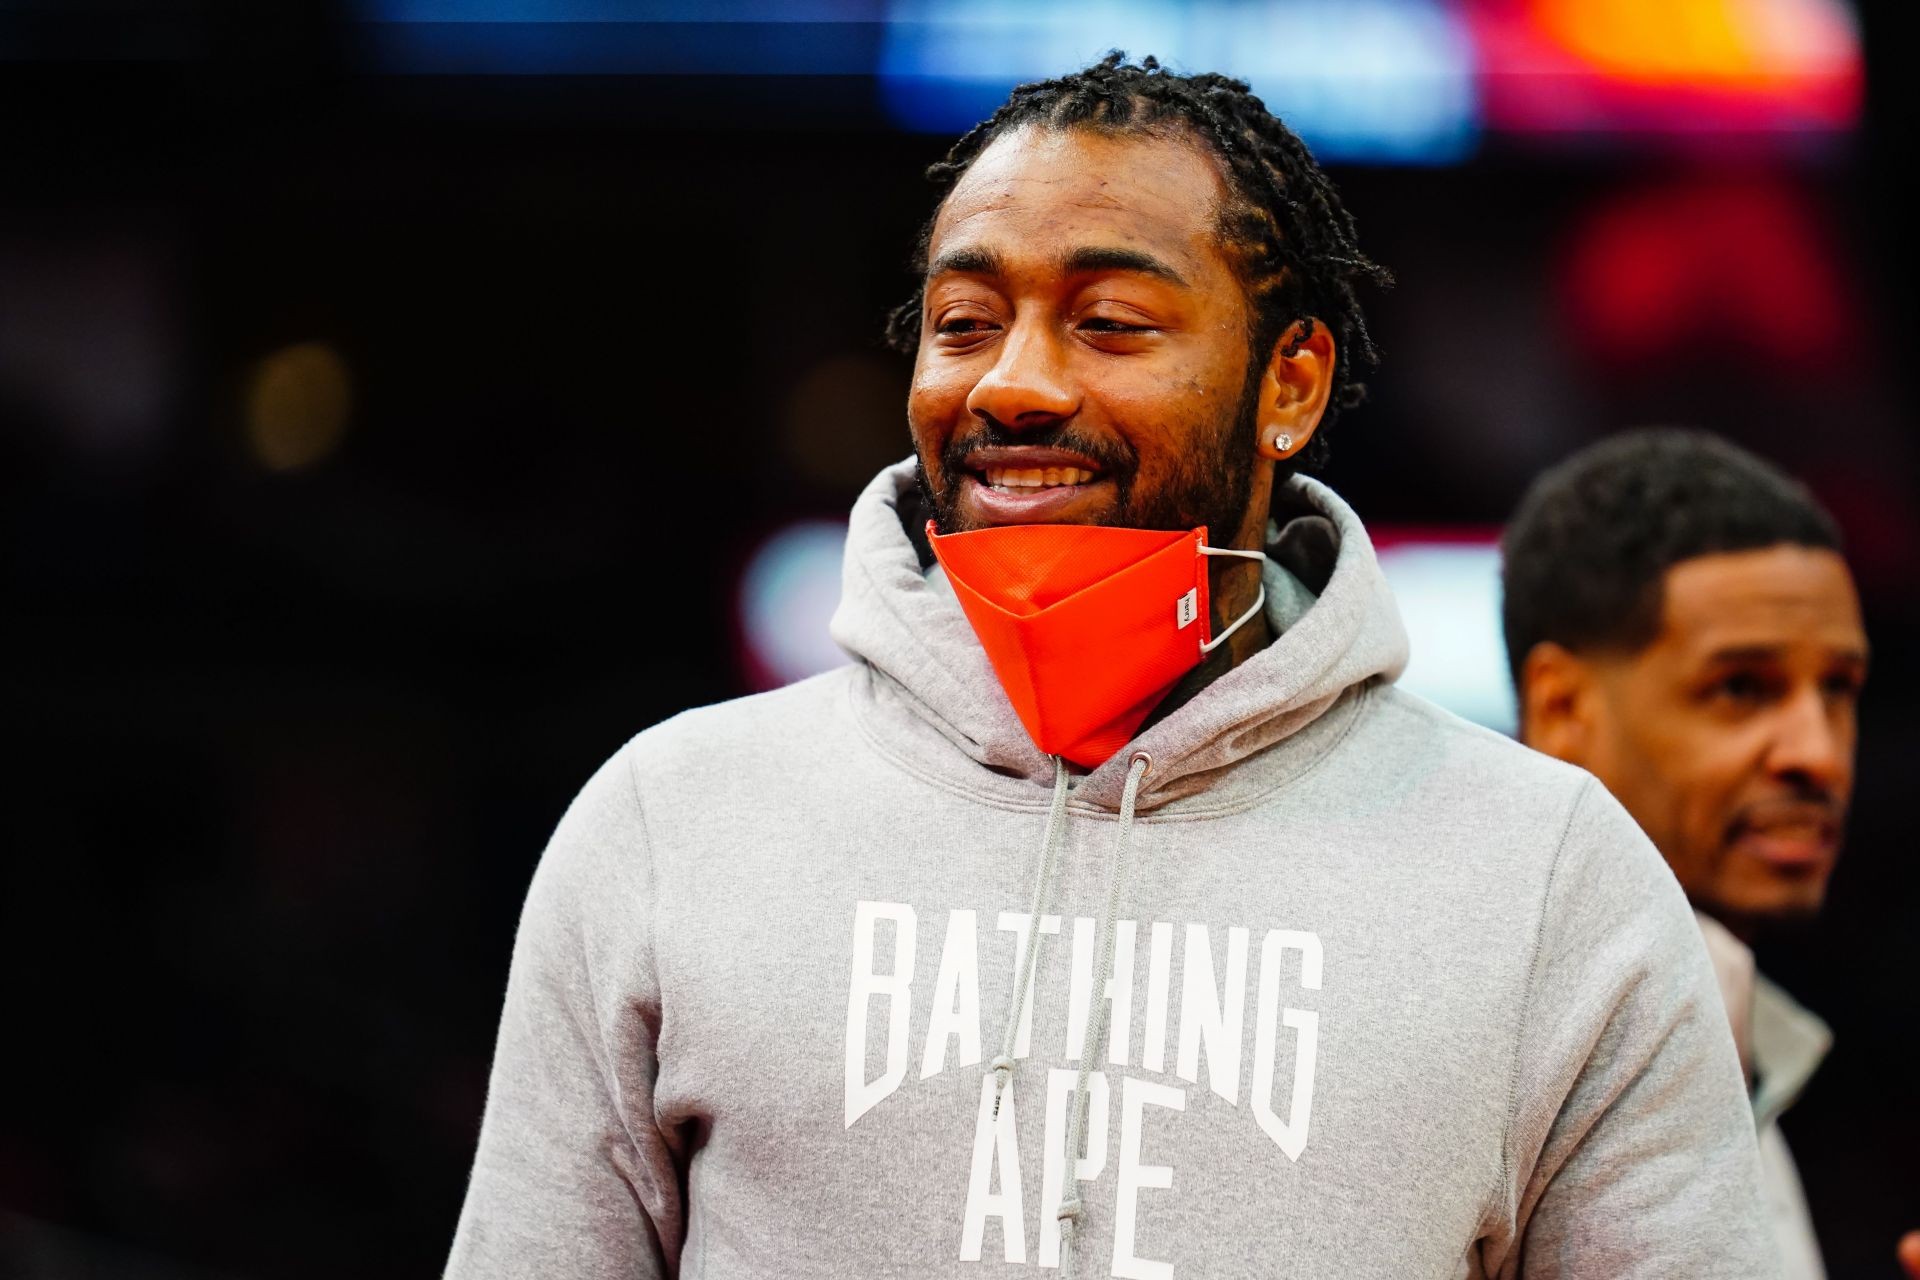 All-Star NBA After suffering an injury when his mother died, John Wall thought about suicide